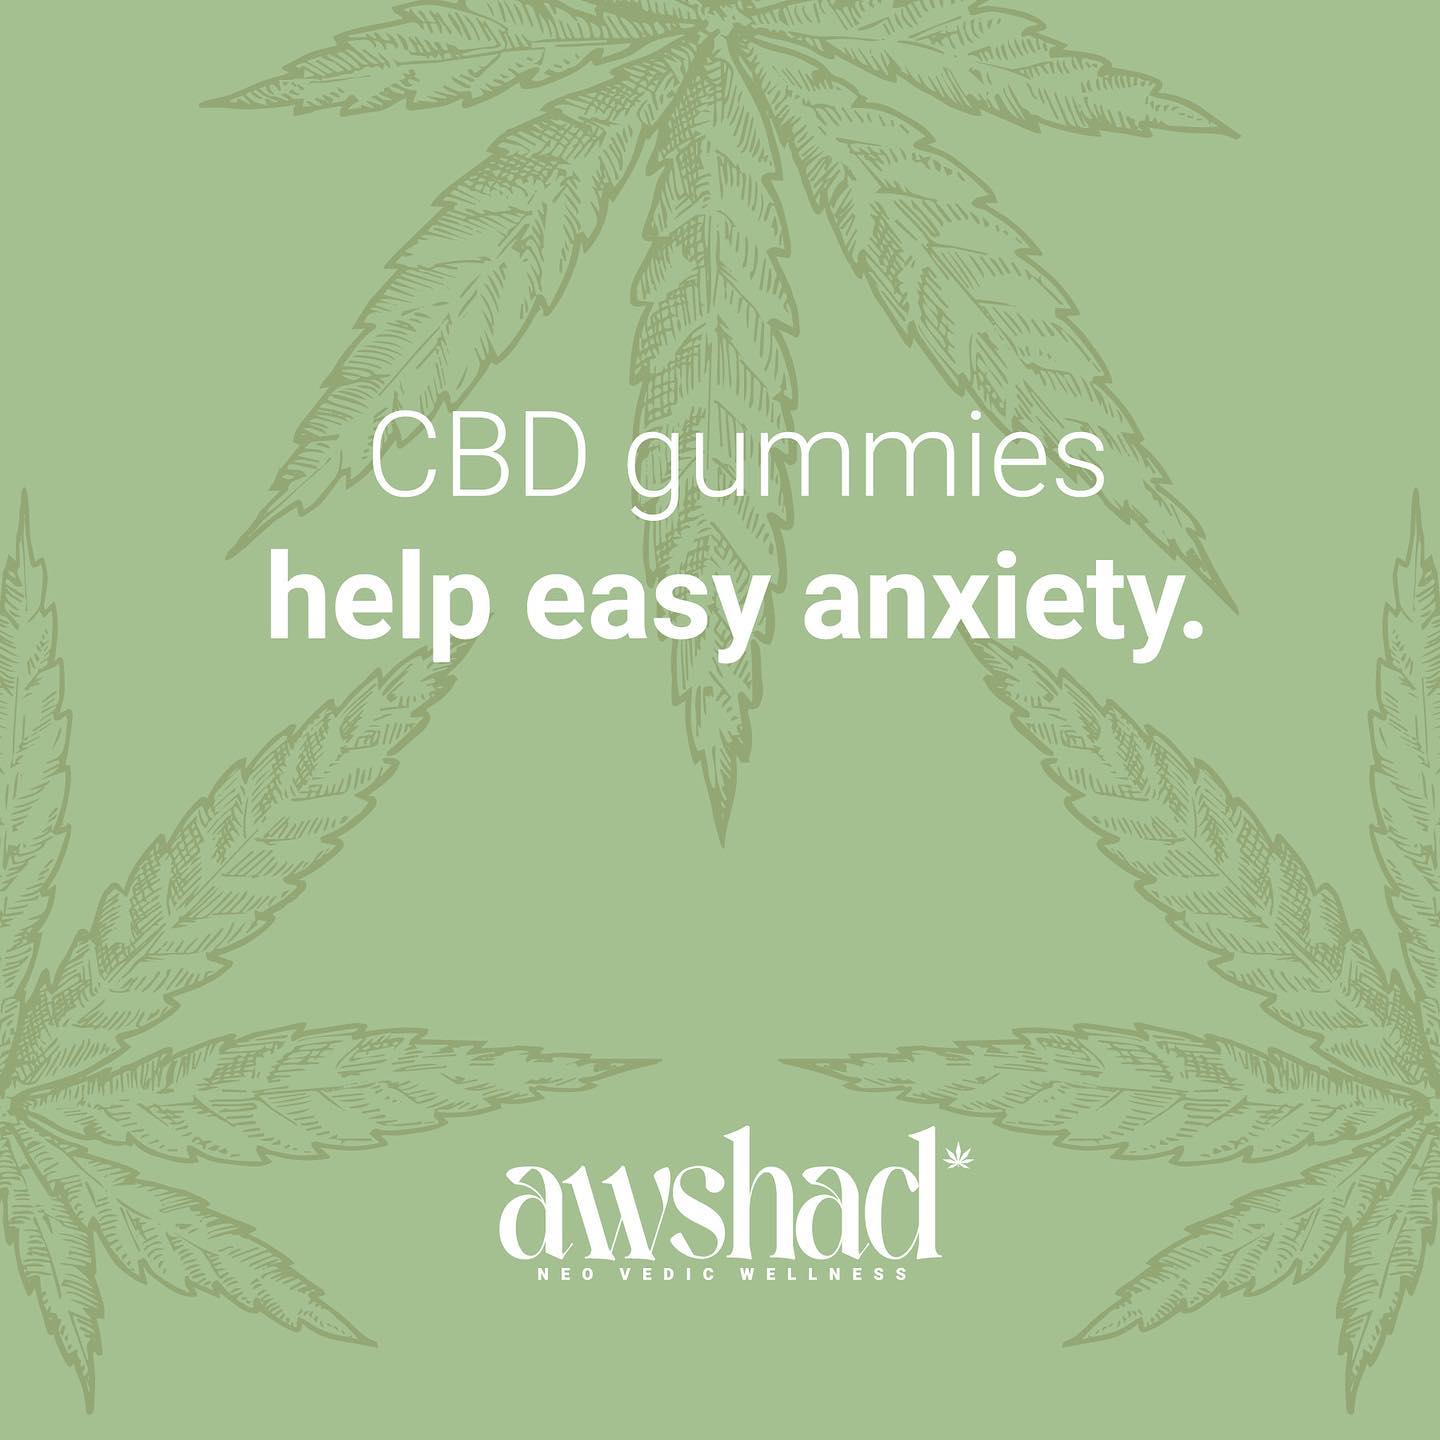 Wondering how else can our CBD gummies benefit you? We will give you another reason. Awshad's CBD gummies can help alleviate your anxiety and any other form of mental stress. 

It is believed that the best way to add them to your daily routine is by taking them in the morning as the
CBD present in the gummies passes through your digestive system and slowly gets absorbed by the bloodstream. 

The four forms of anxiety that CBD gummies can help you with are - 

👉🏼ADHD
👉🏼OCD 
👉🏼PTSD
👉🏼Panic attacks

Pick up your gummies on www.awshad.com today! 

#awshad #allnatural #hempbenefits #gummies  #wellness #sleepaid #cbdgummies #vijayaoil  #hempextract #hempproducts #insomnia #health #healthandwellness #healthy #immunity #heal #natural #naturalremedy #ordernow #care #love  #safe #doctor #ayurveda #healing #newproduct.